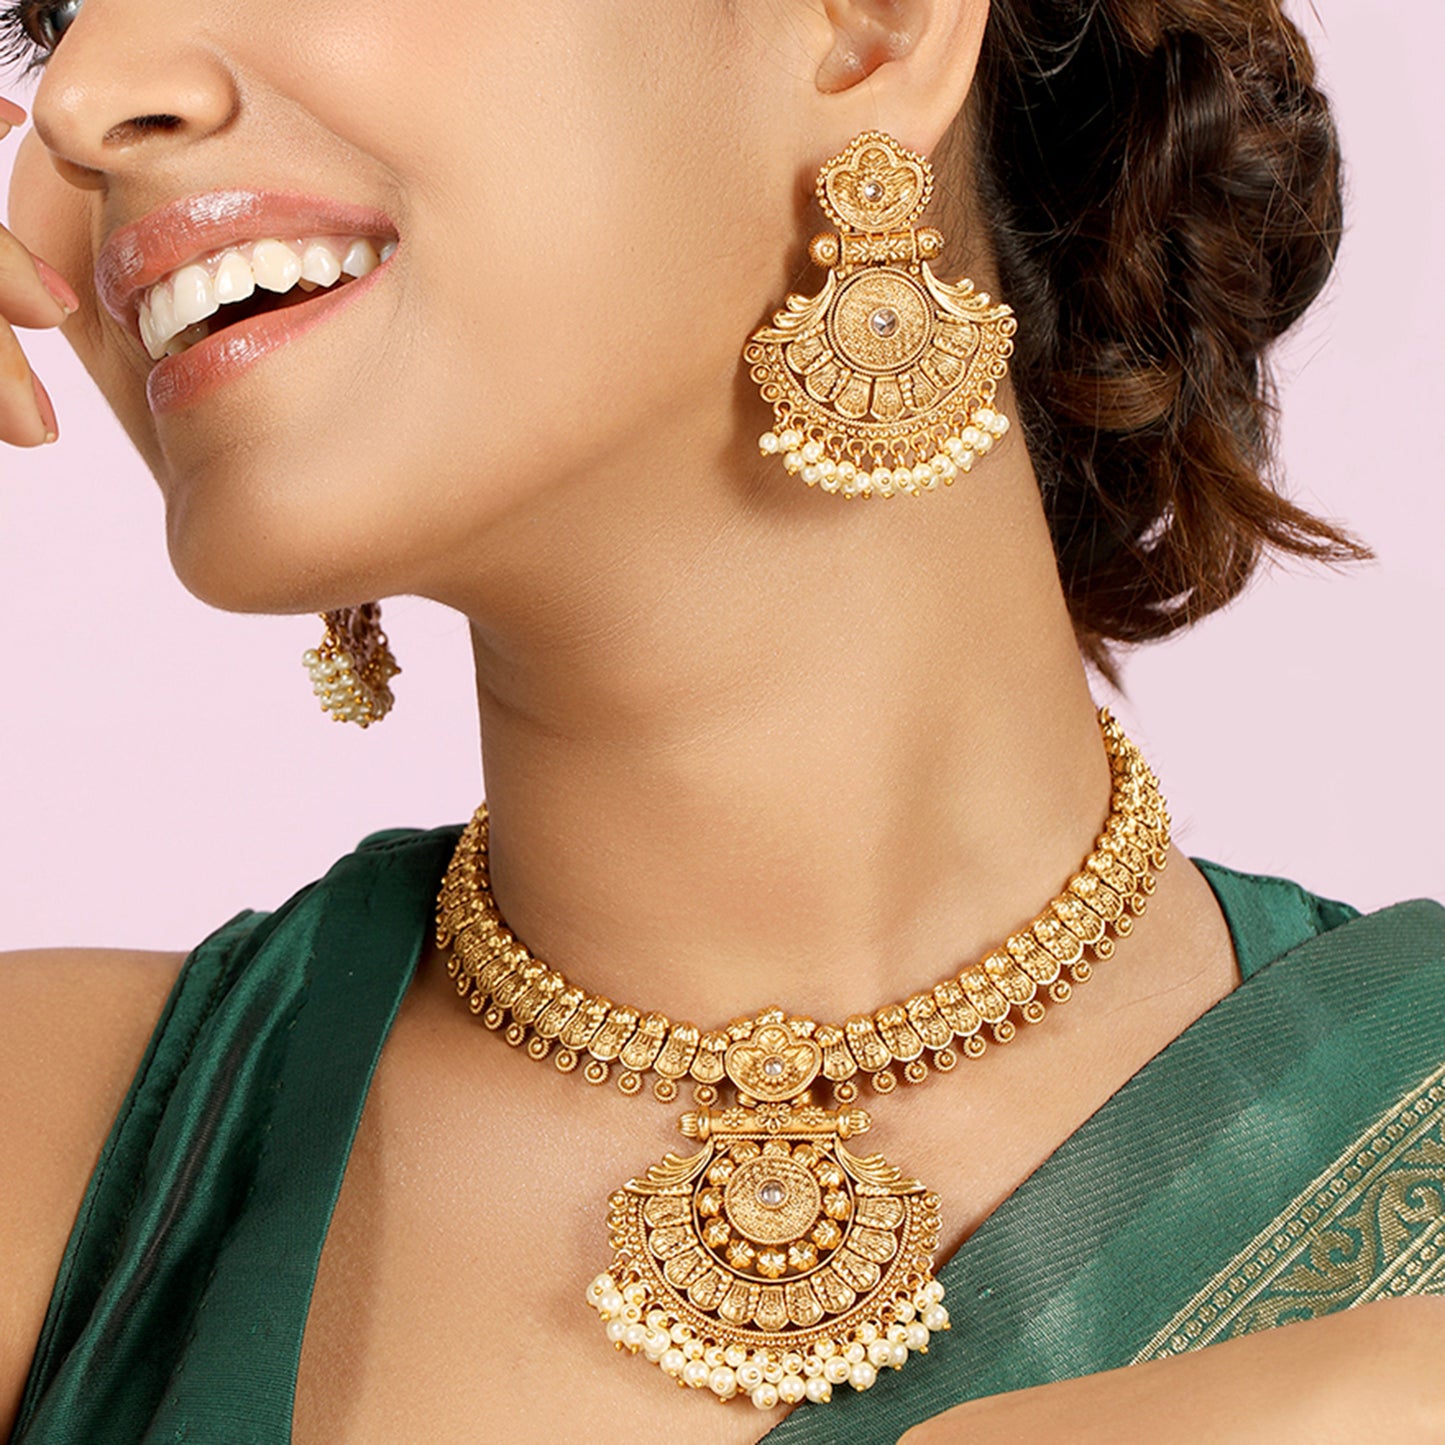 Vintage India Royal Statement Necklace with Earrings